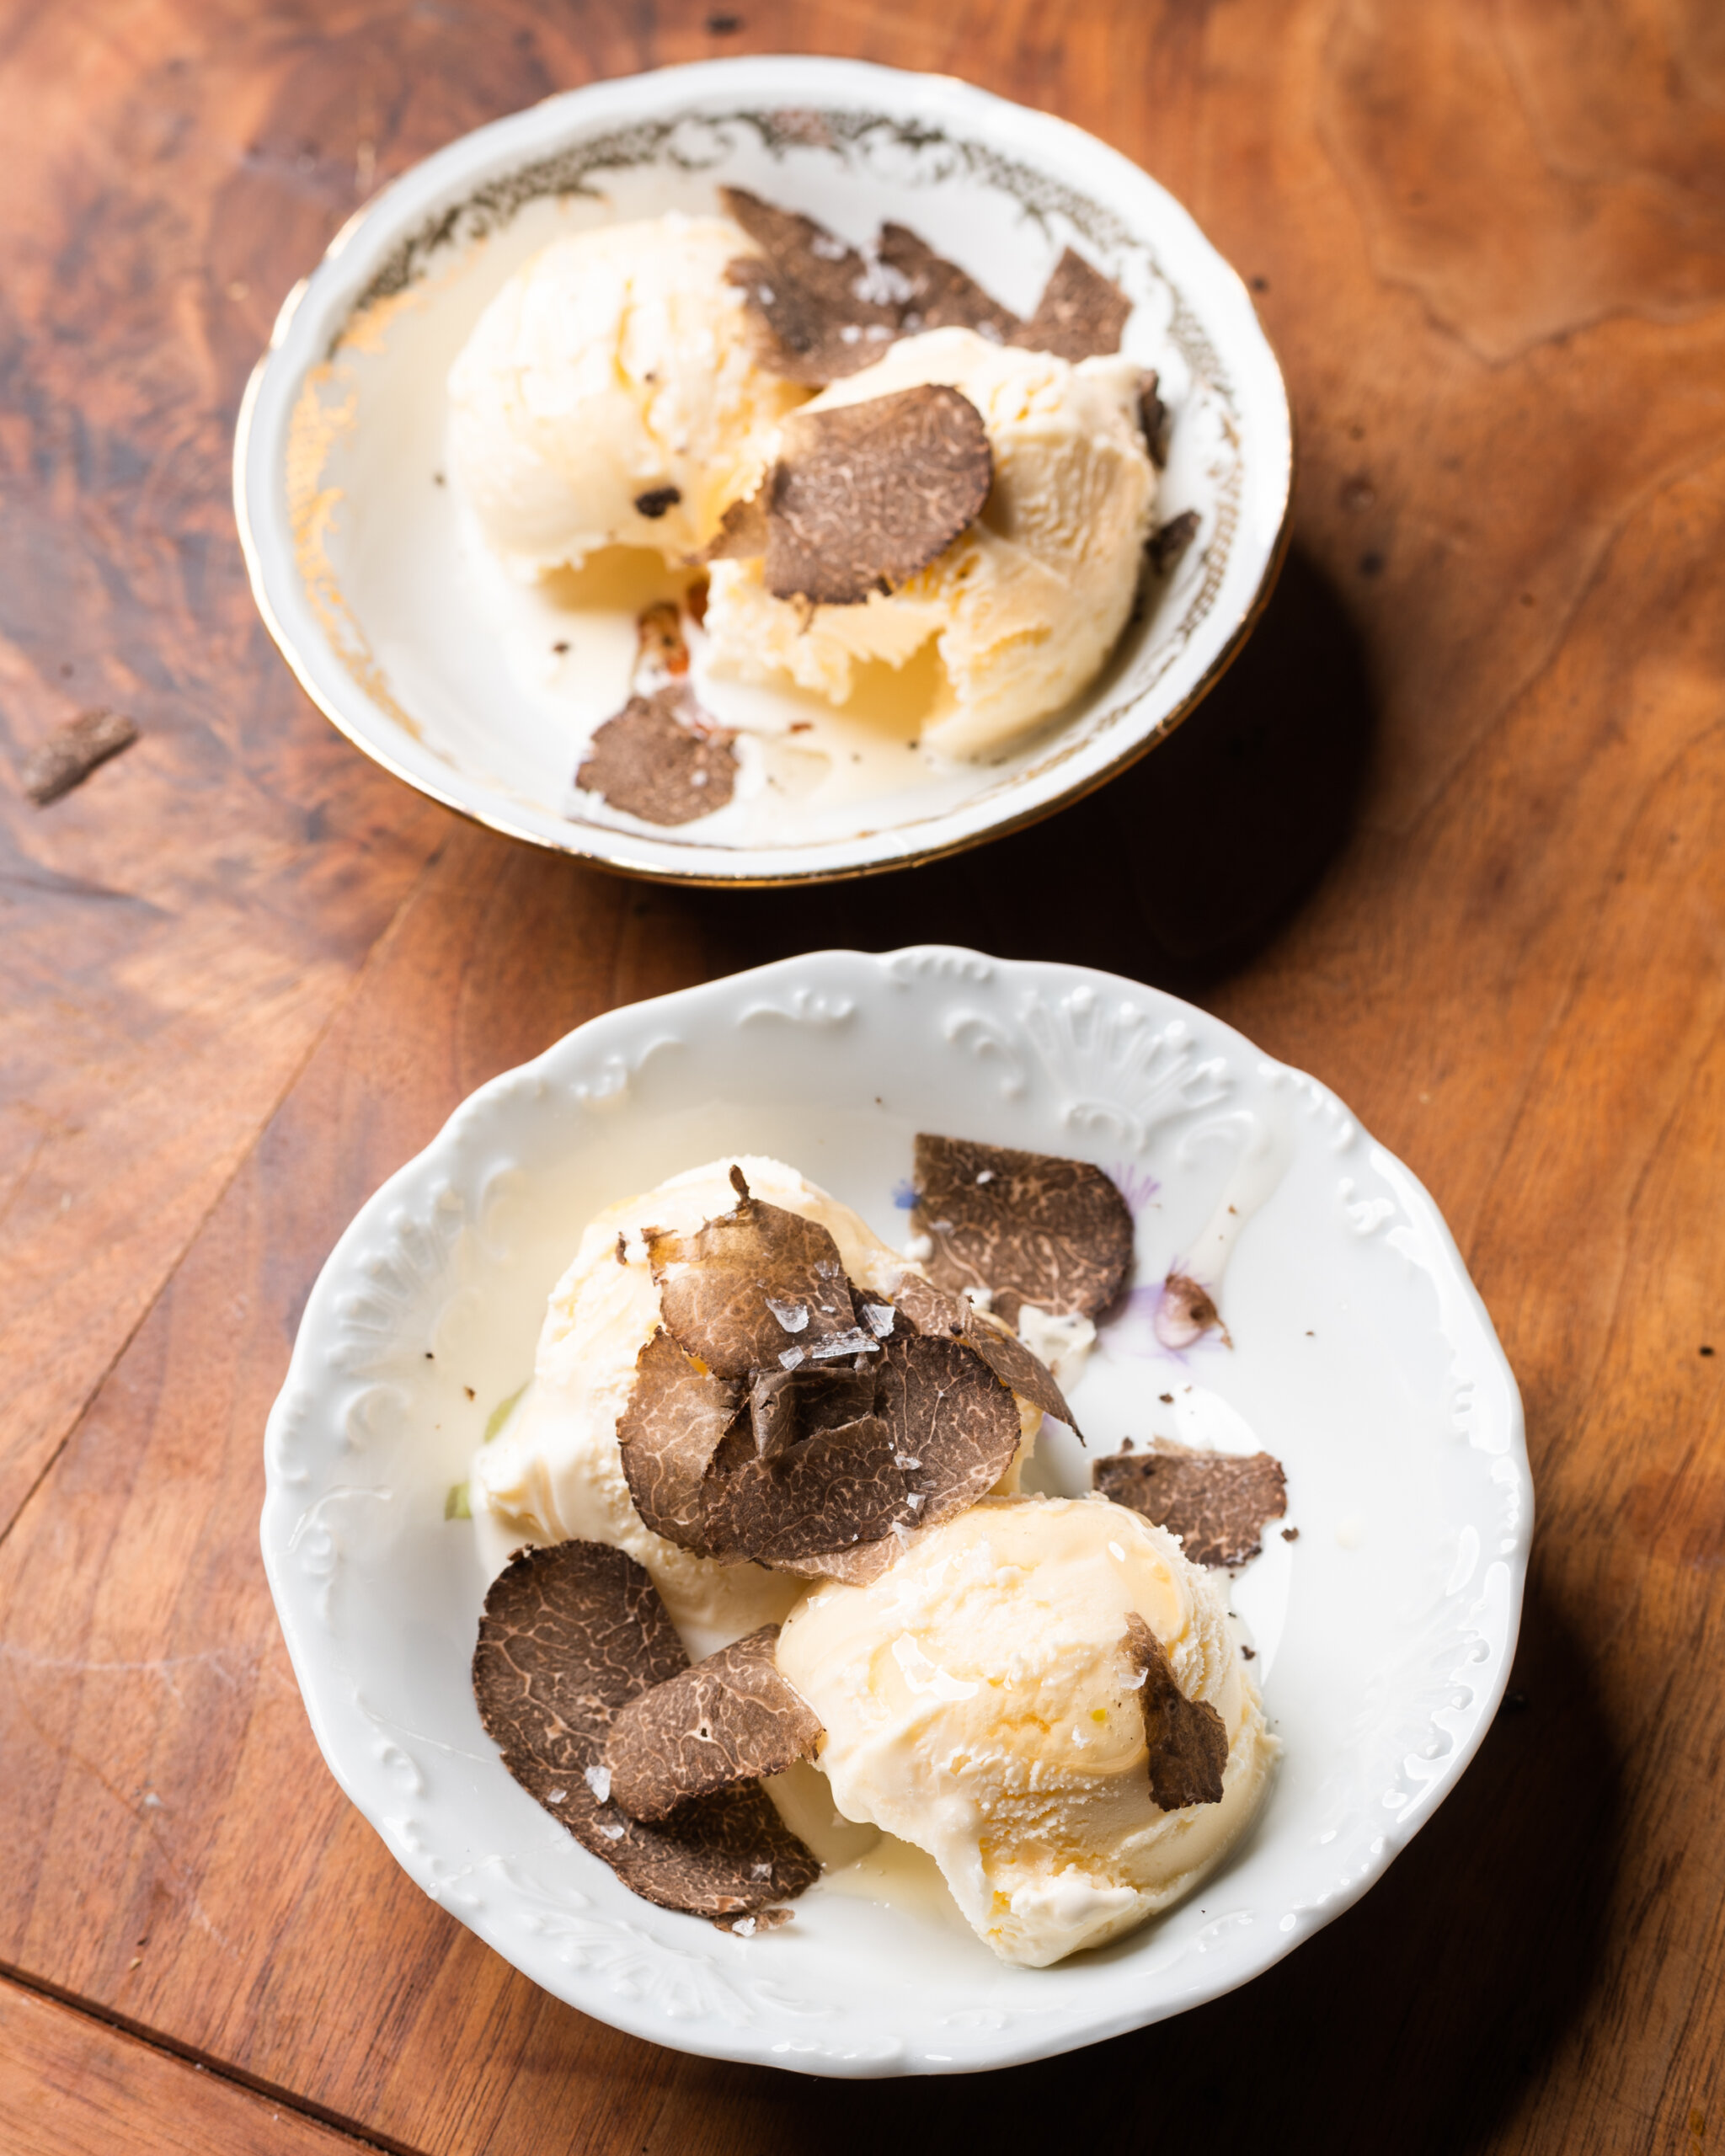 Vanilla ice cream with shaved truffles and a drizzle of local honey